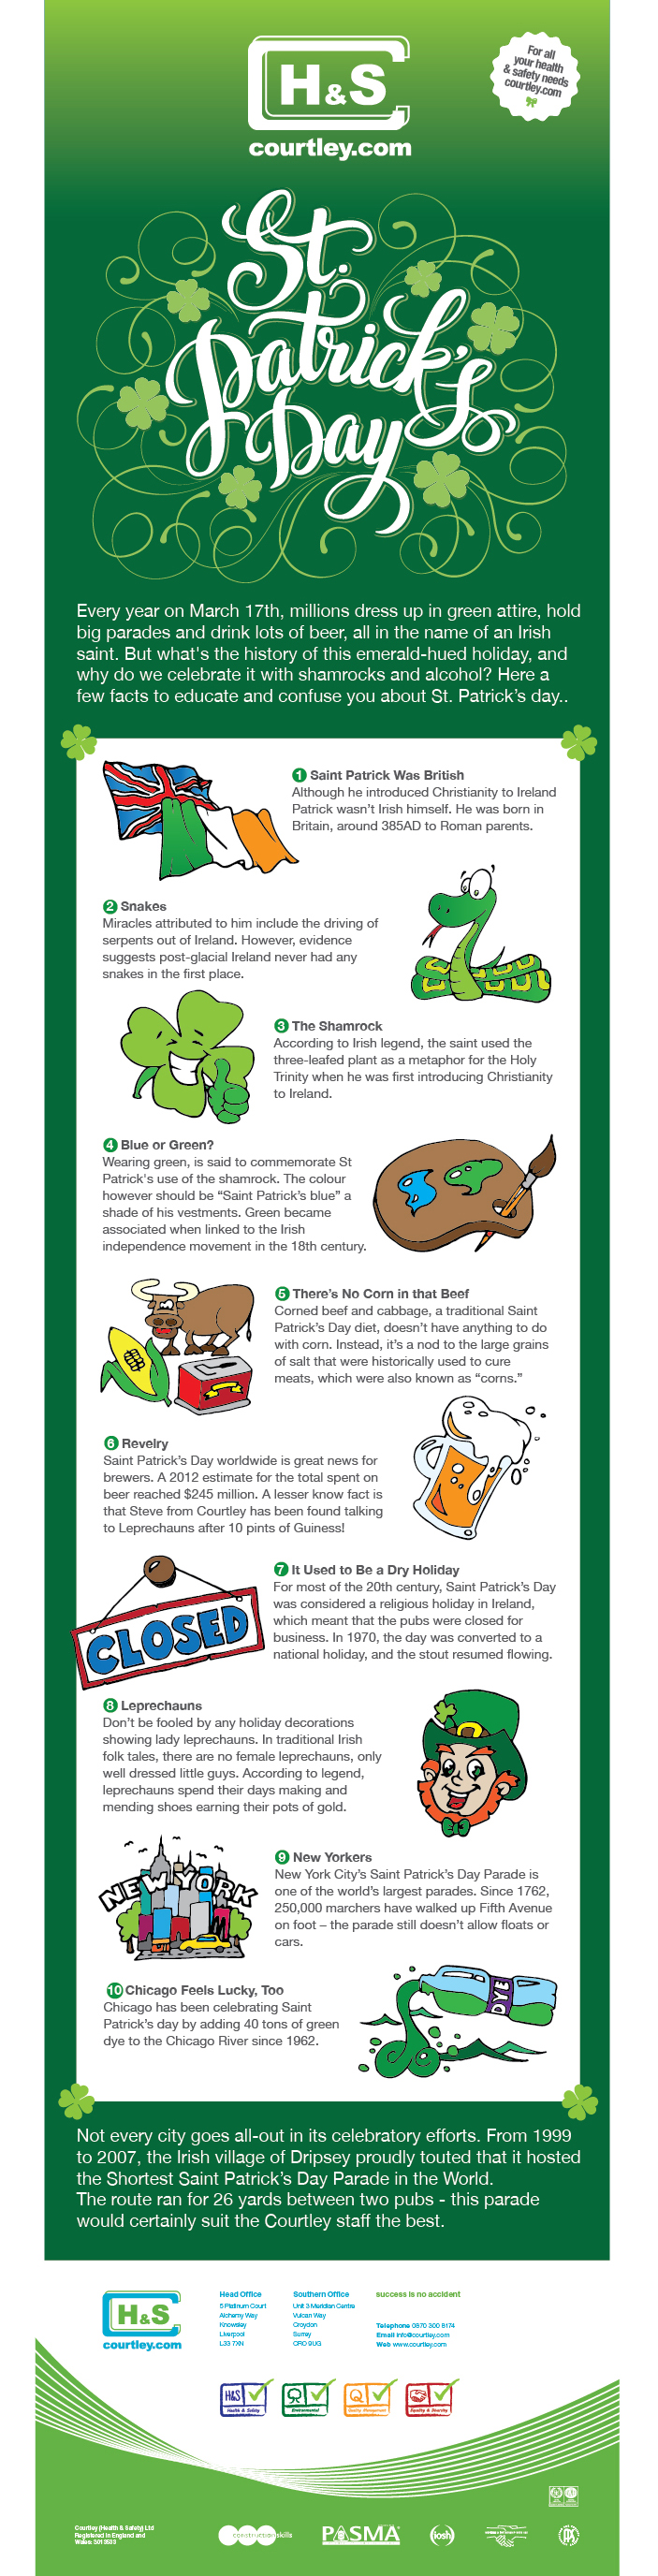 St Patrick's Day fun facts